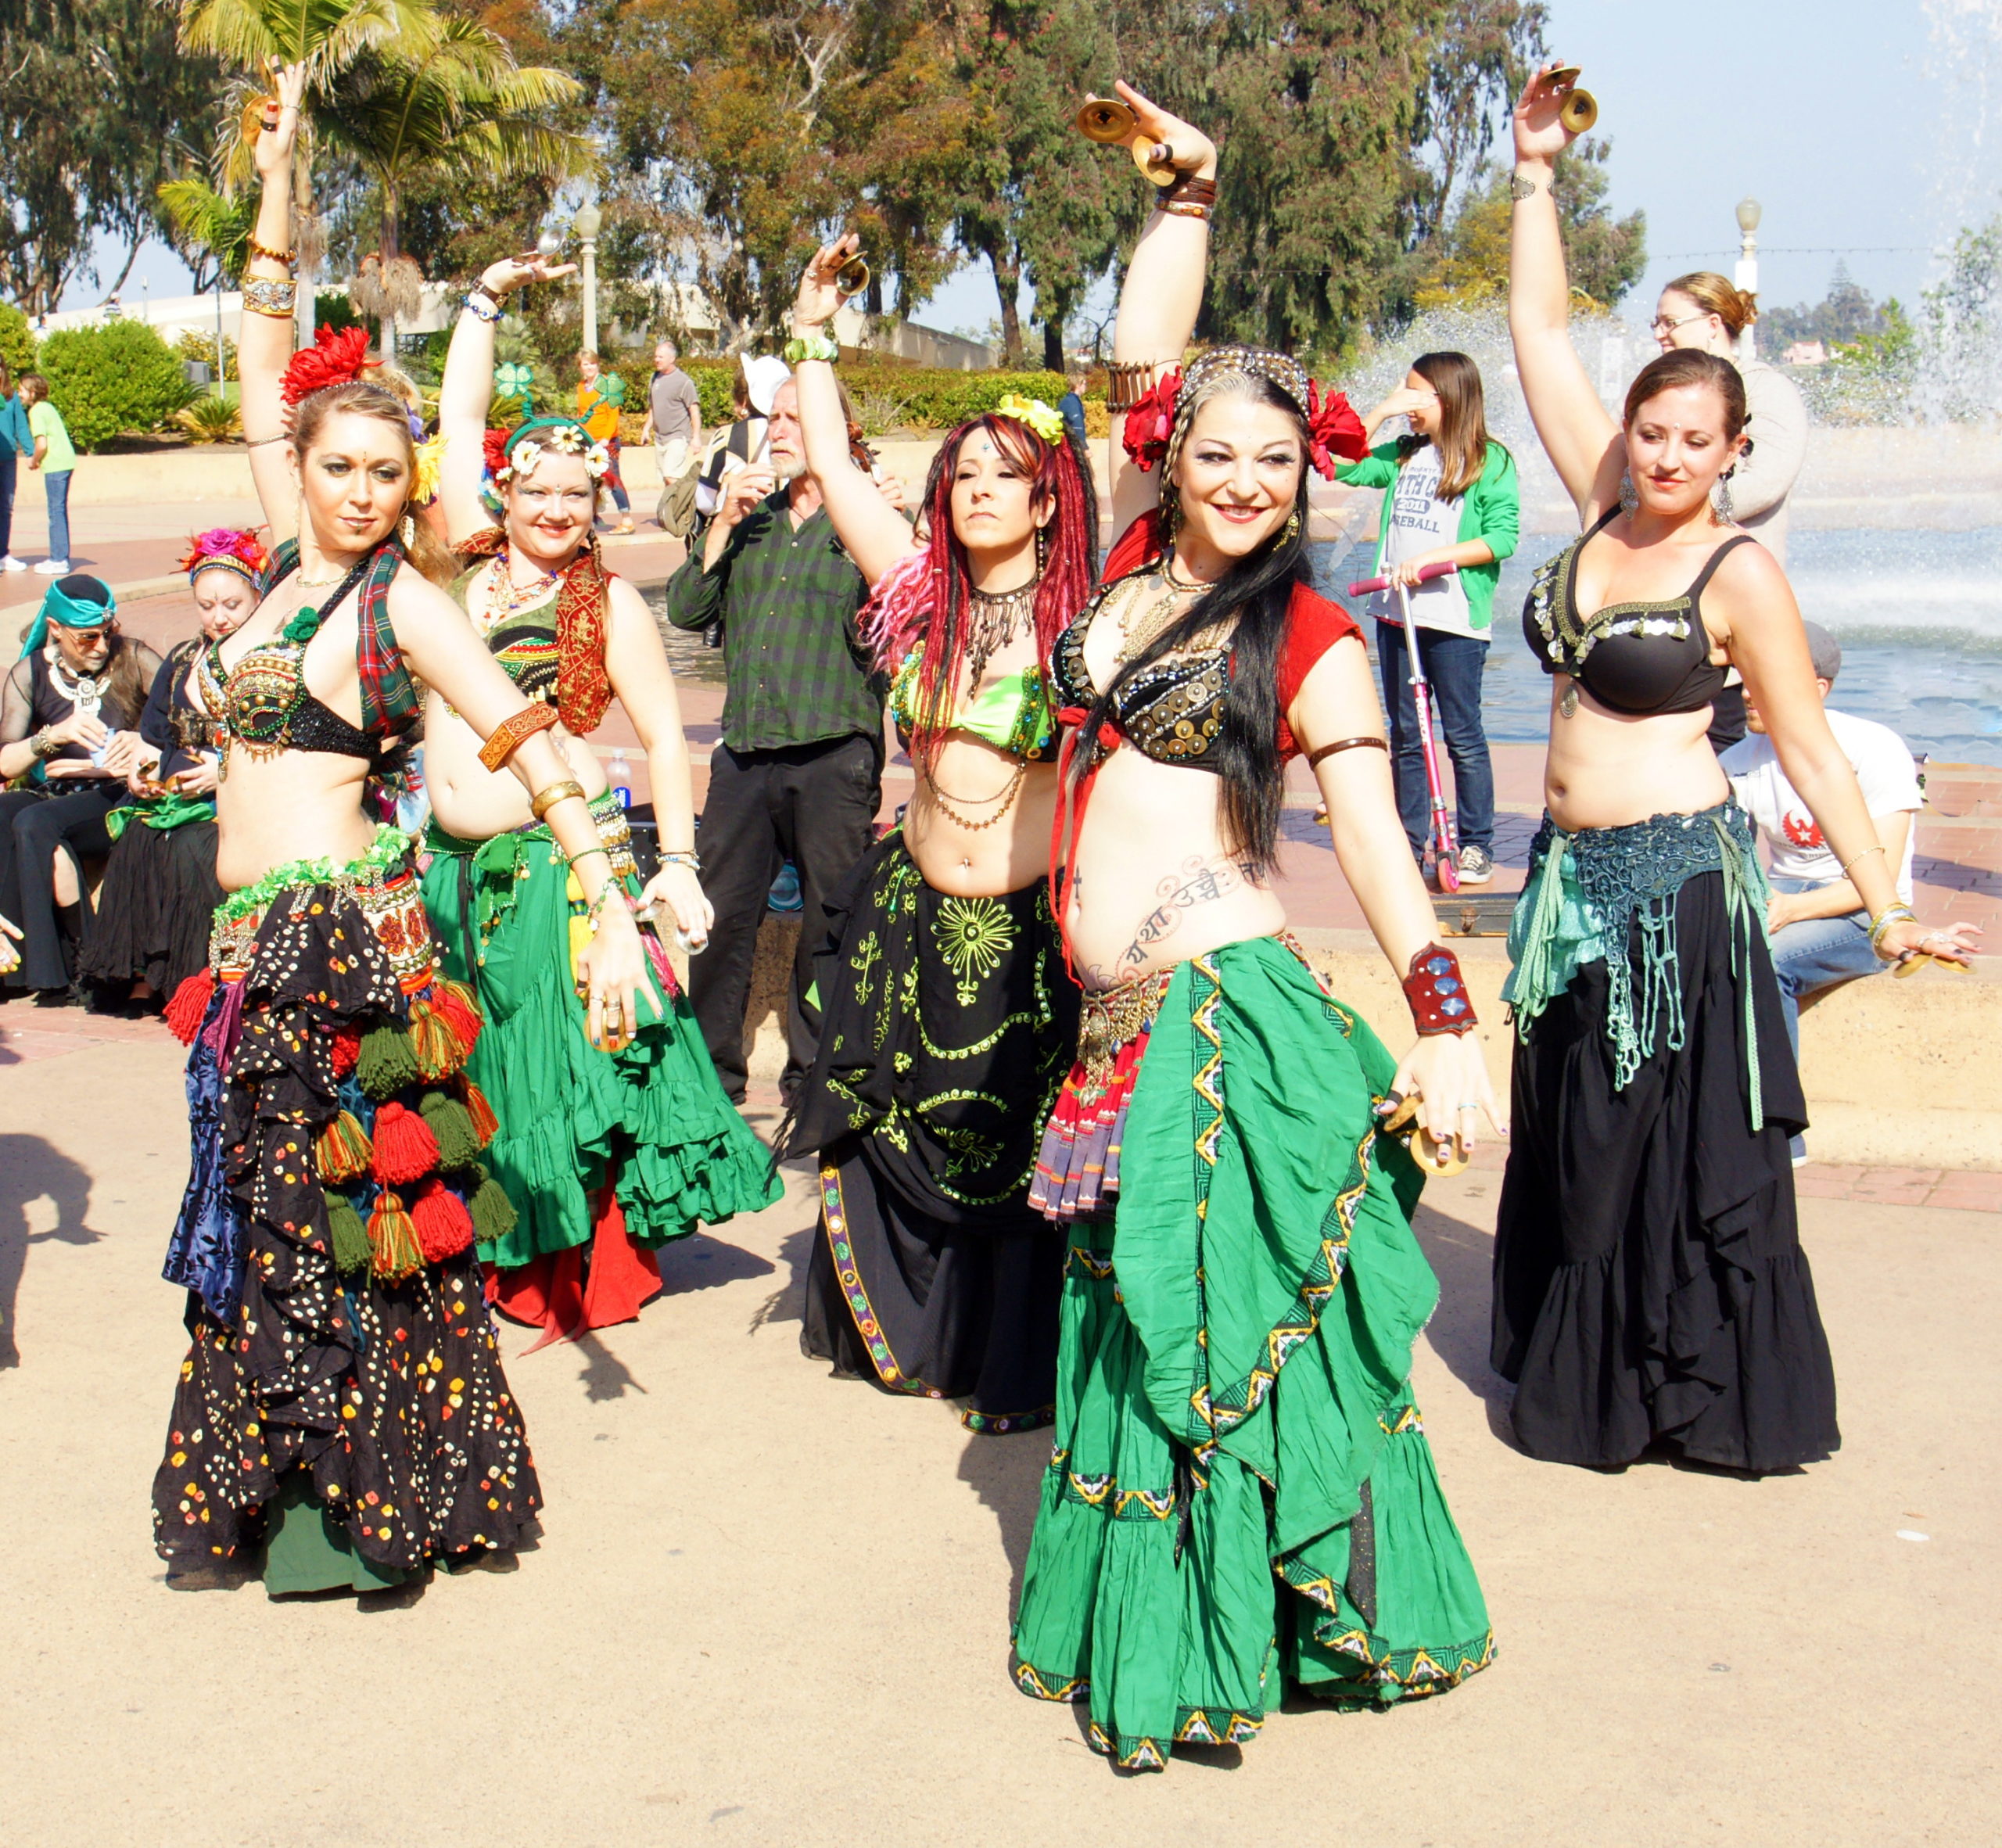 Tribal belly dancers being their own music.